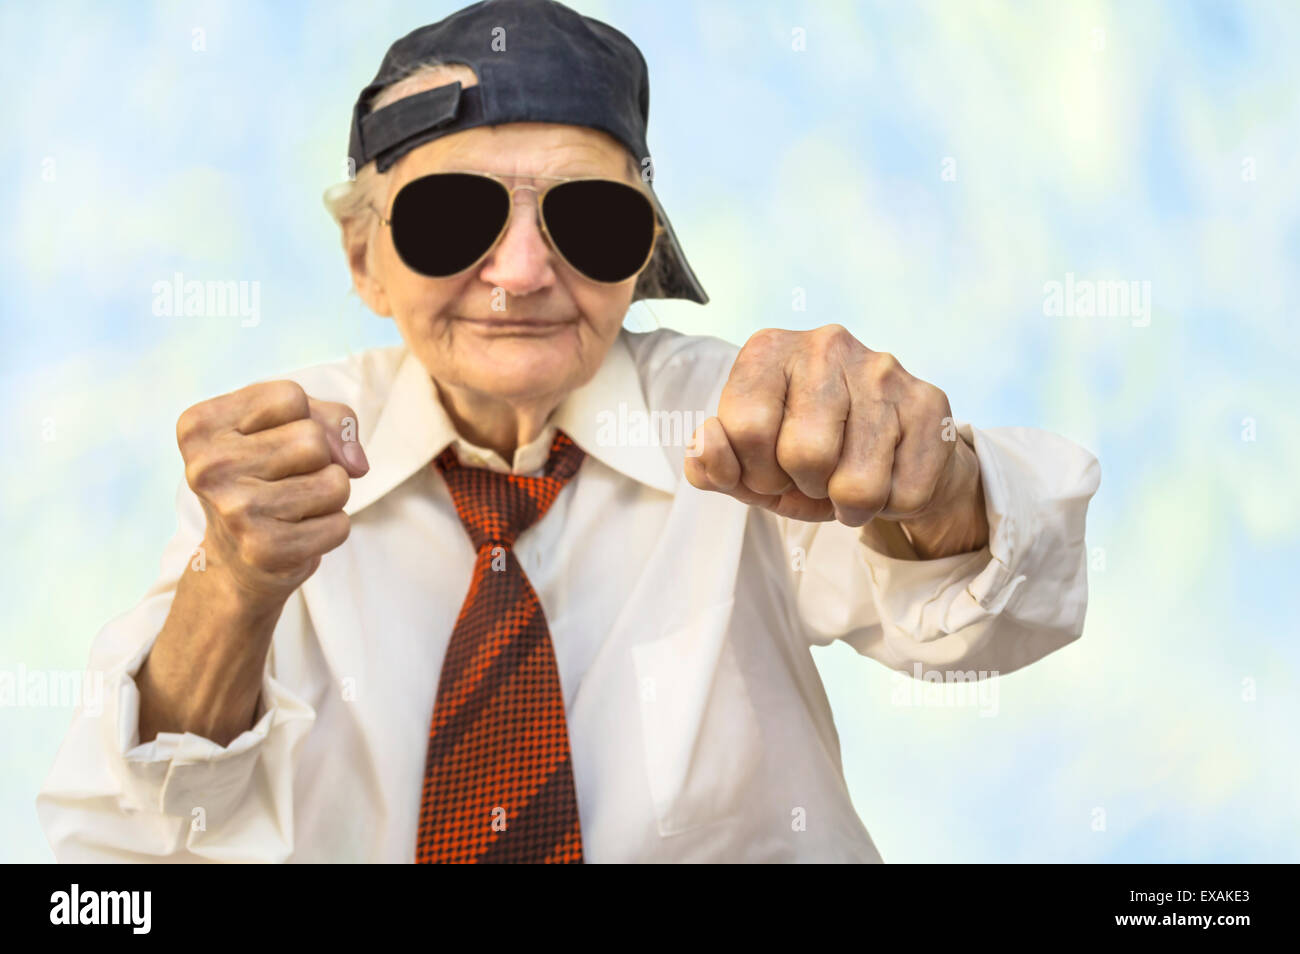 Funny elderly woman wearing cap in a fight pose. Selective focus. Stock Photo